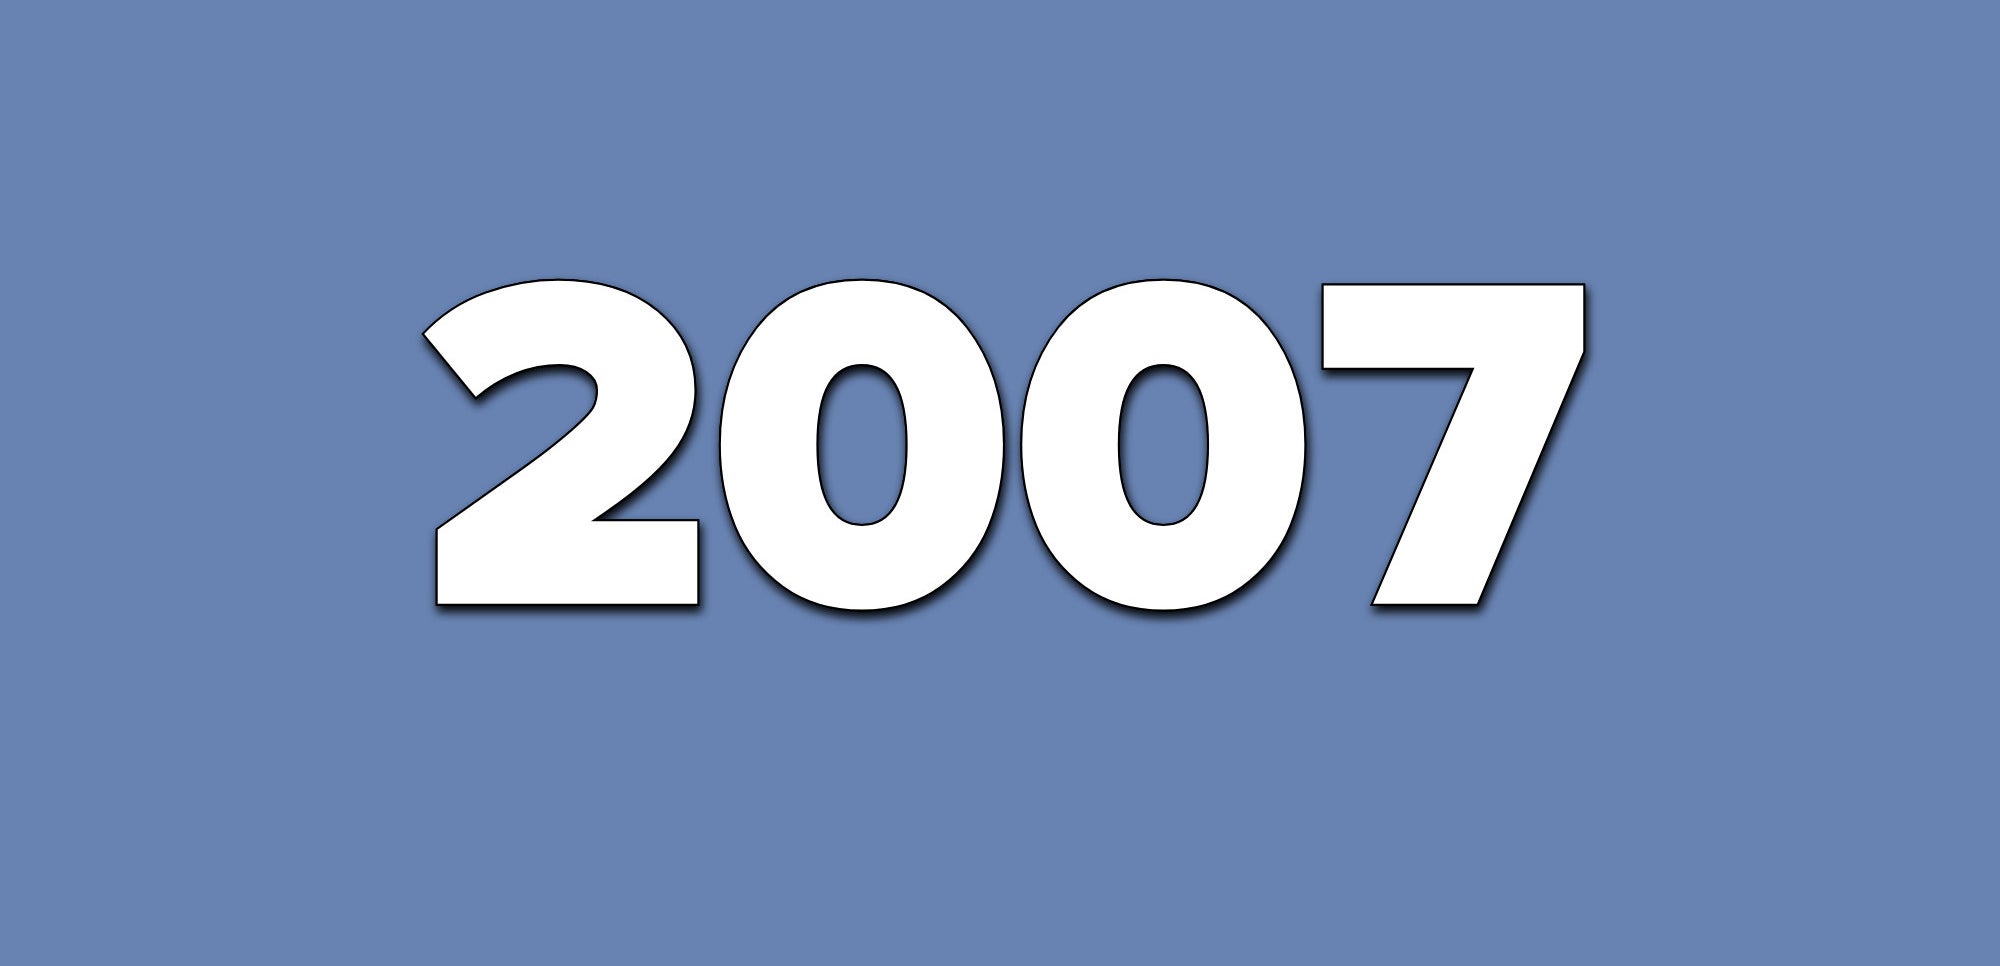 A blue background with text that says 2007